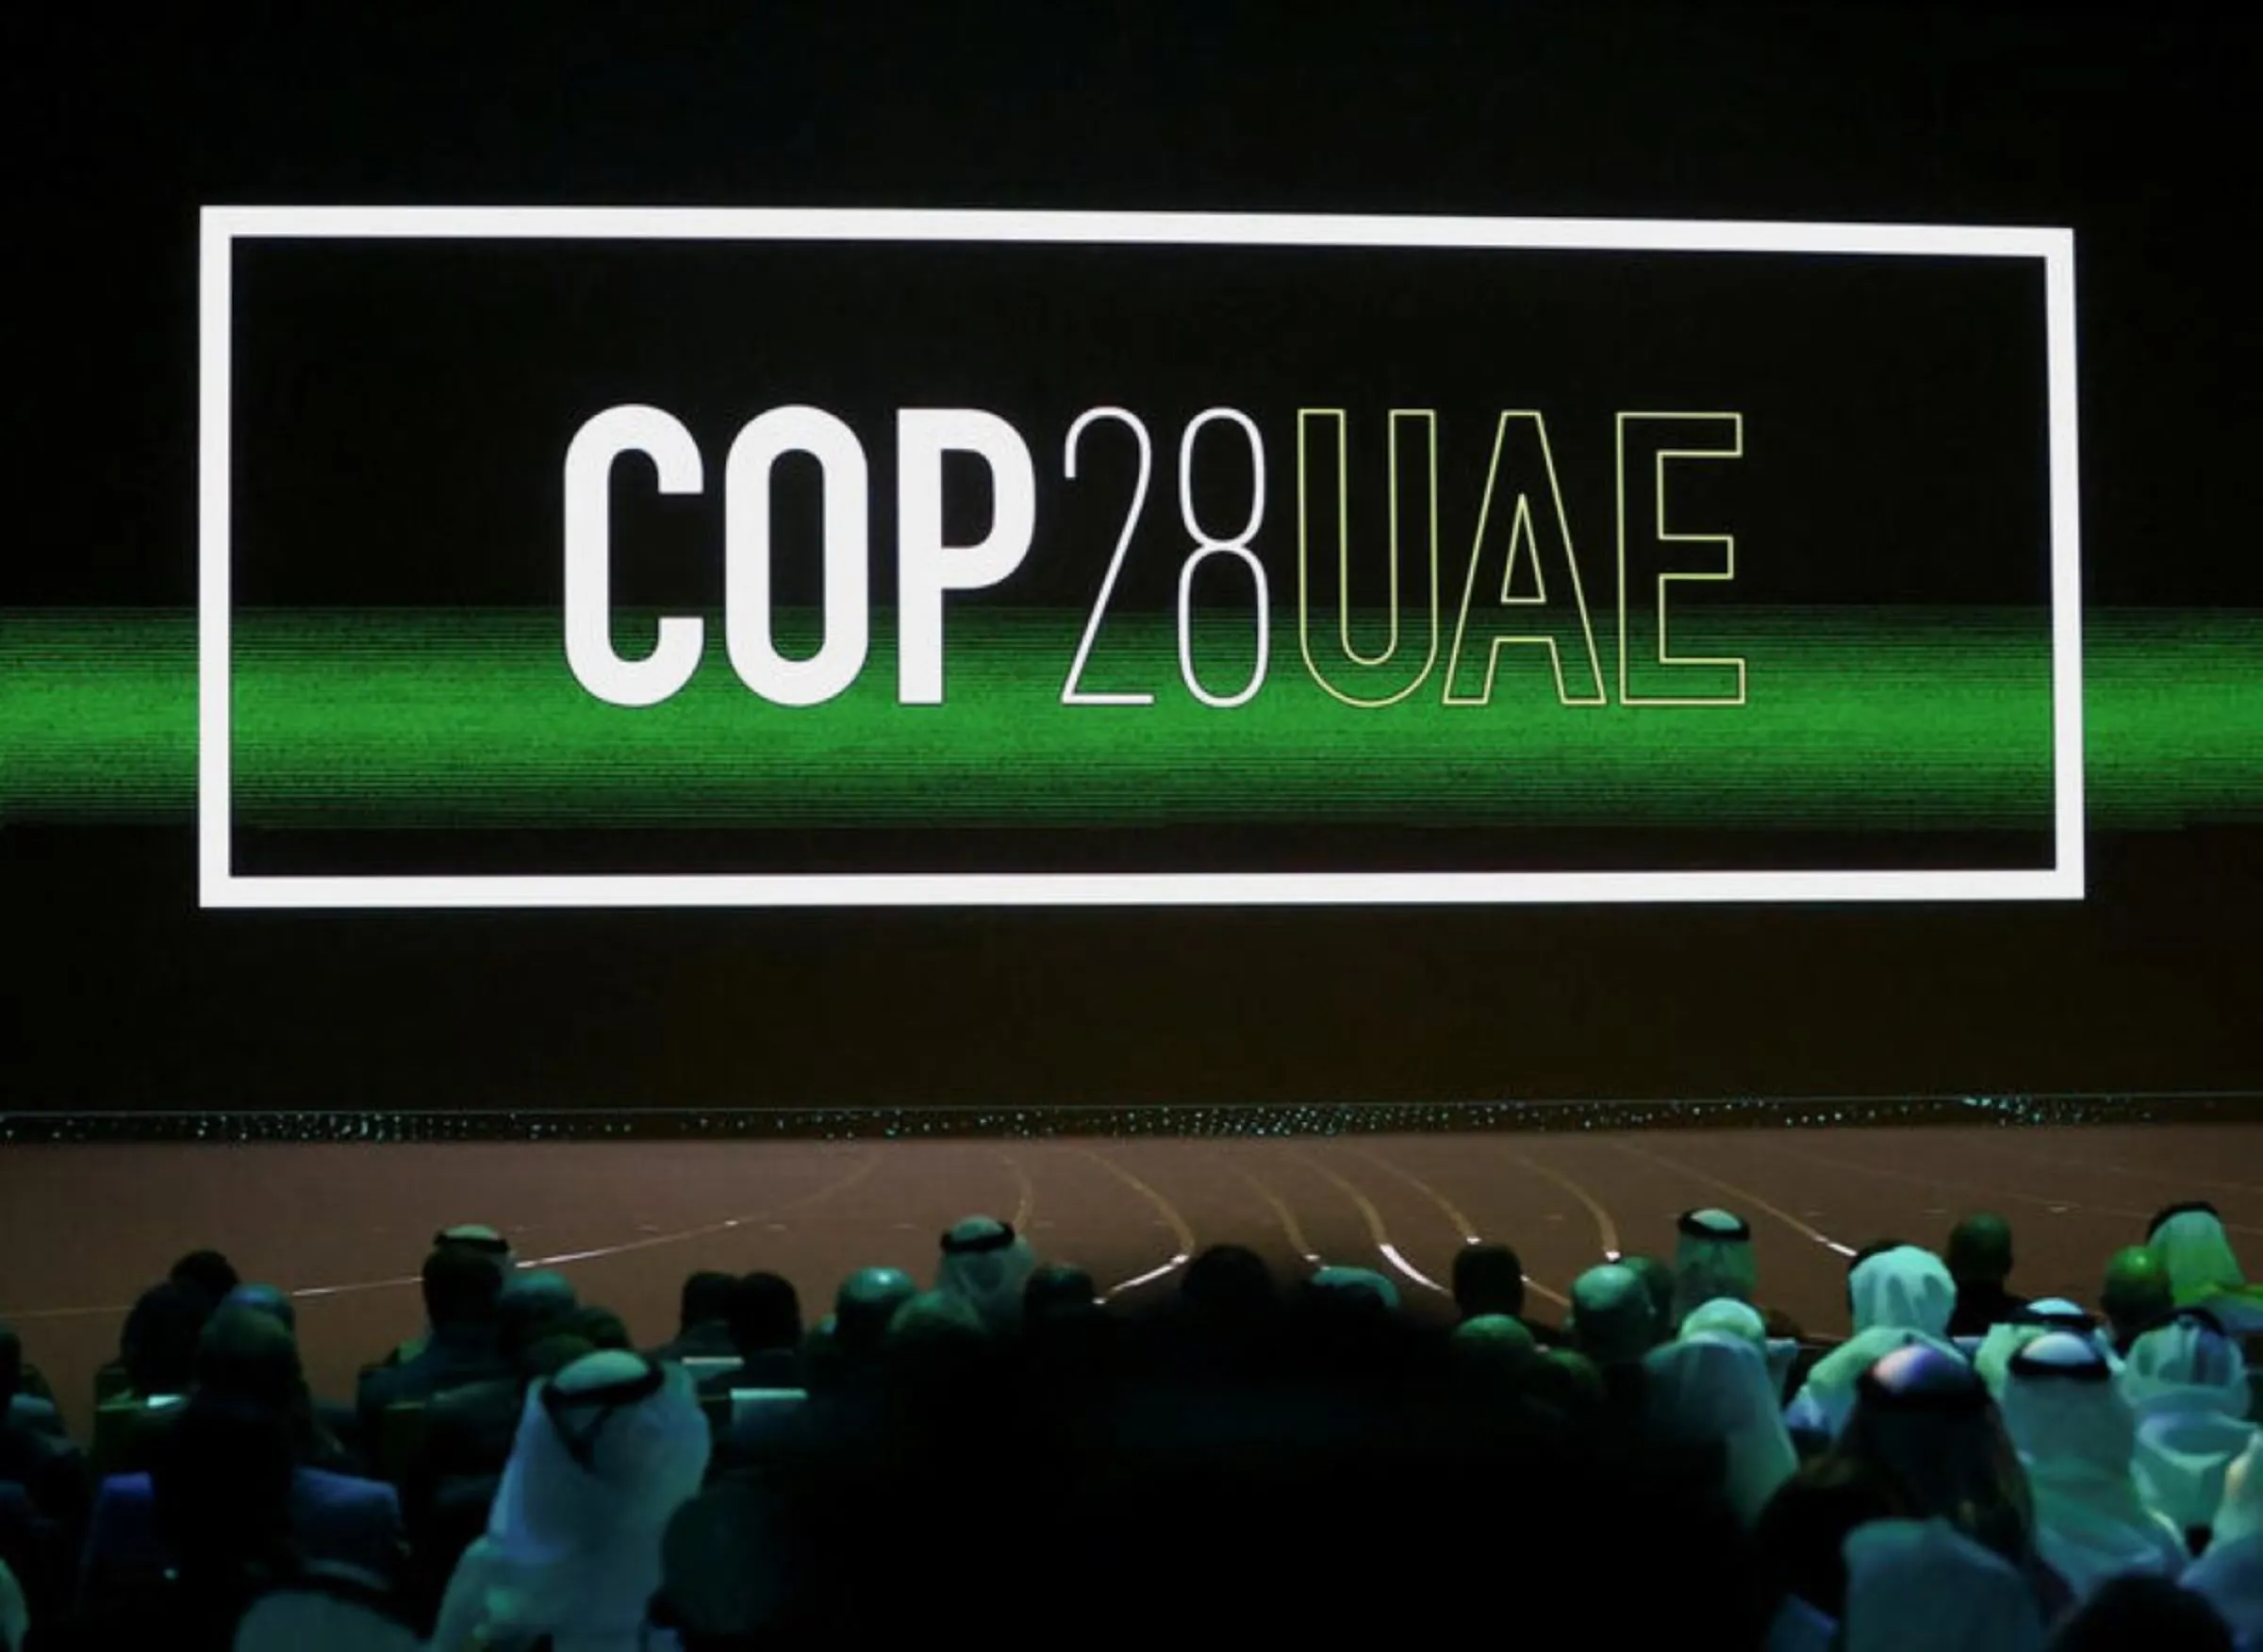 The 'Cop28 UAE' logo is displayed on the screen during the opening ceremony of Abu Dhabi Sustainability Week (ADSW) under the theme of 'United on Climate Action Toward COP28', in Abu Dhabi, UAE, January 16, 2023. REUTERS/Rula Rouhana